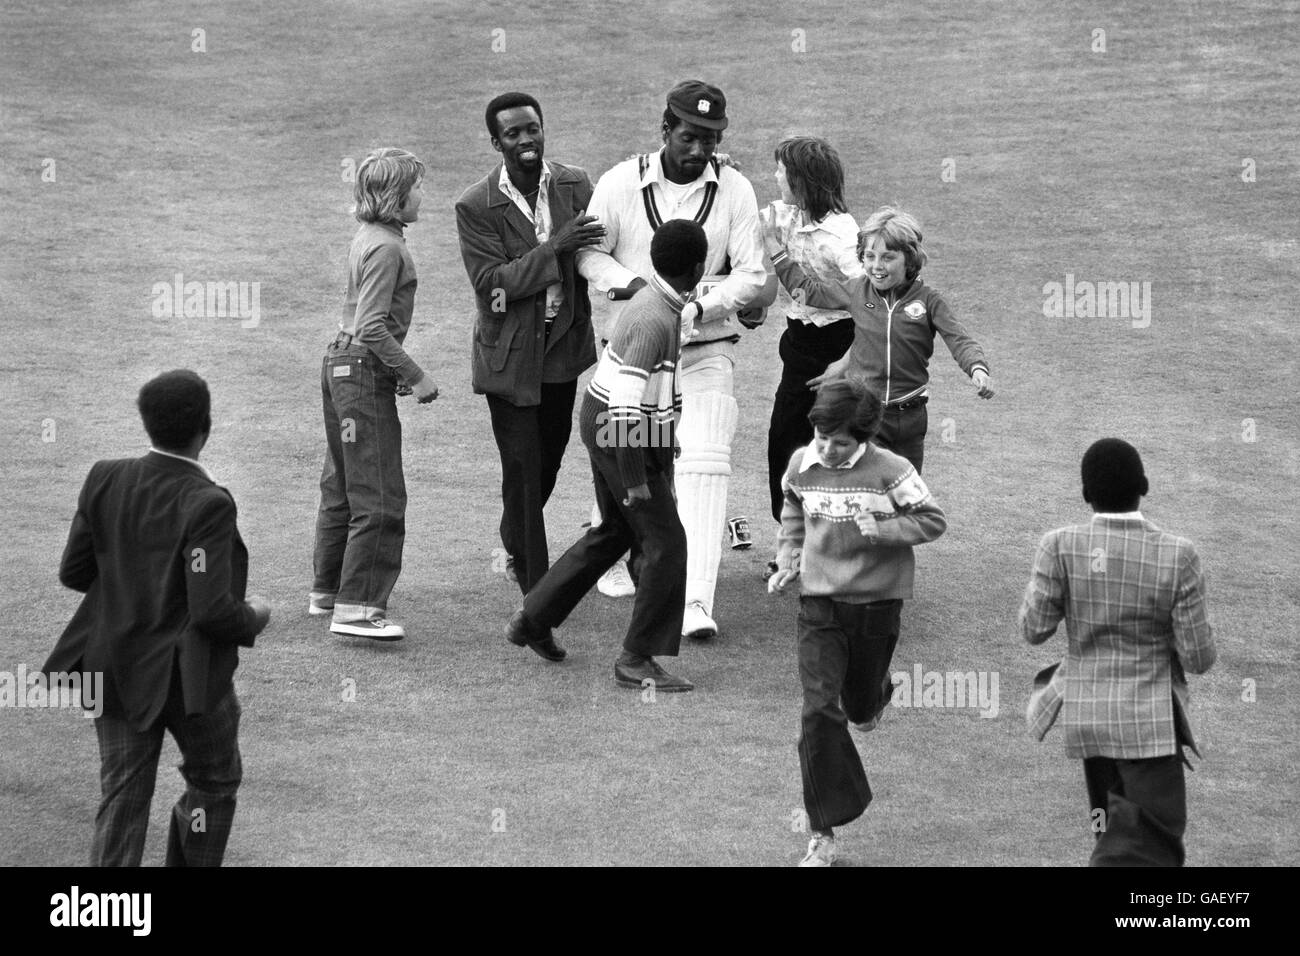 Sport - Cricket - England v The West Indies - Test Match - 1976 Stock Photo